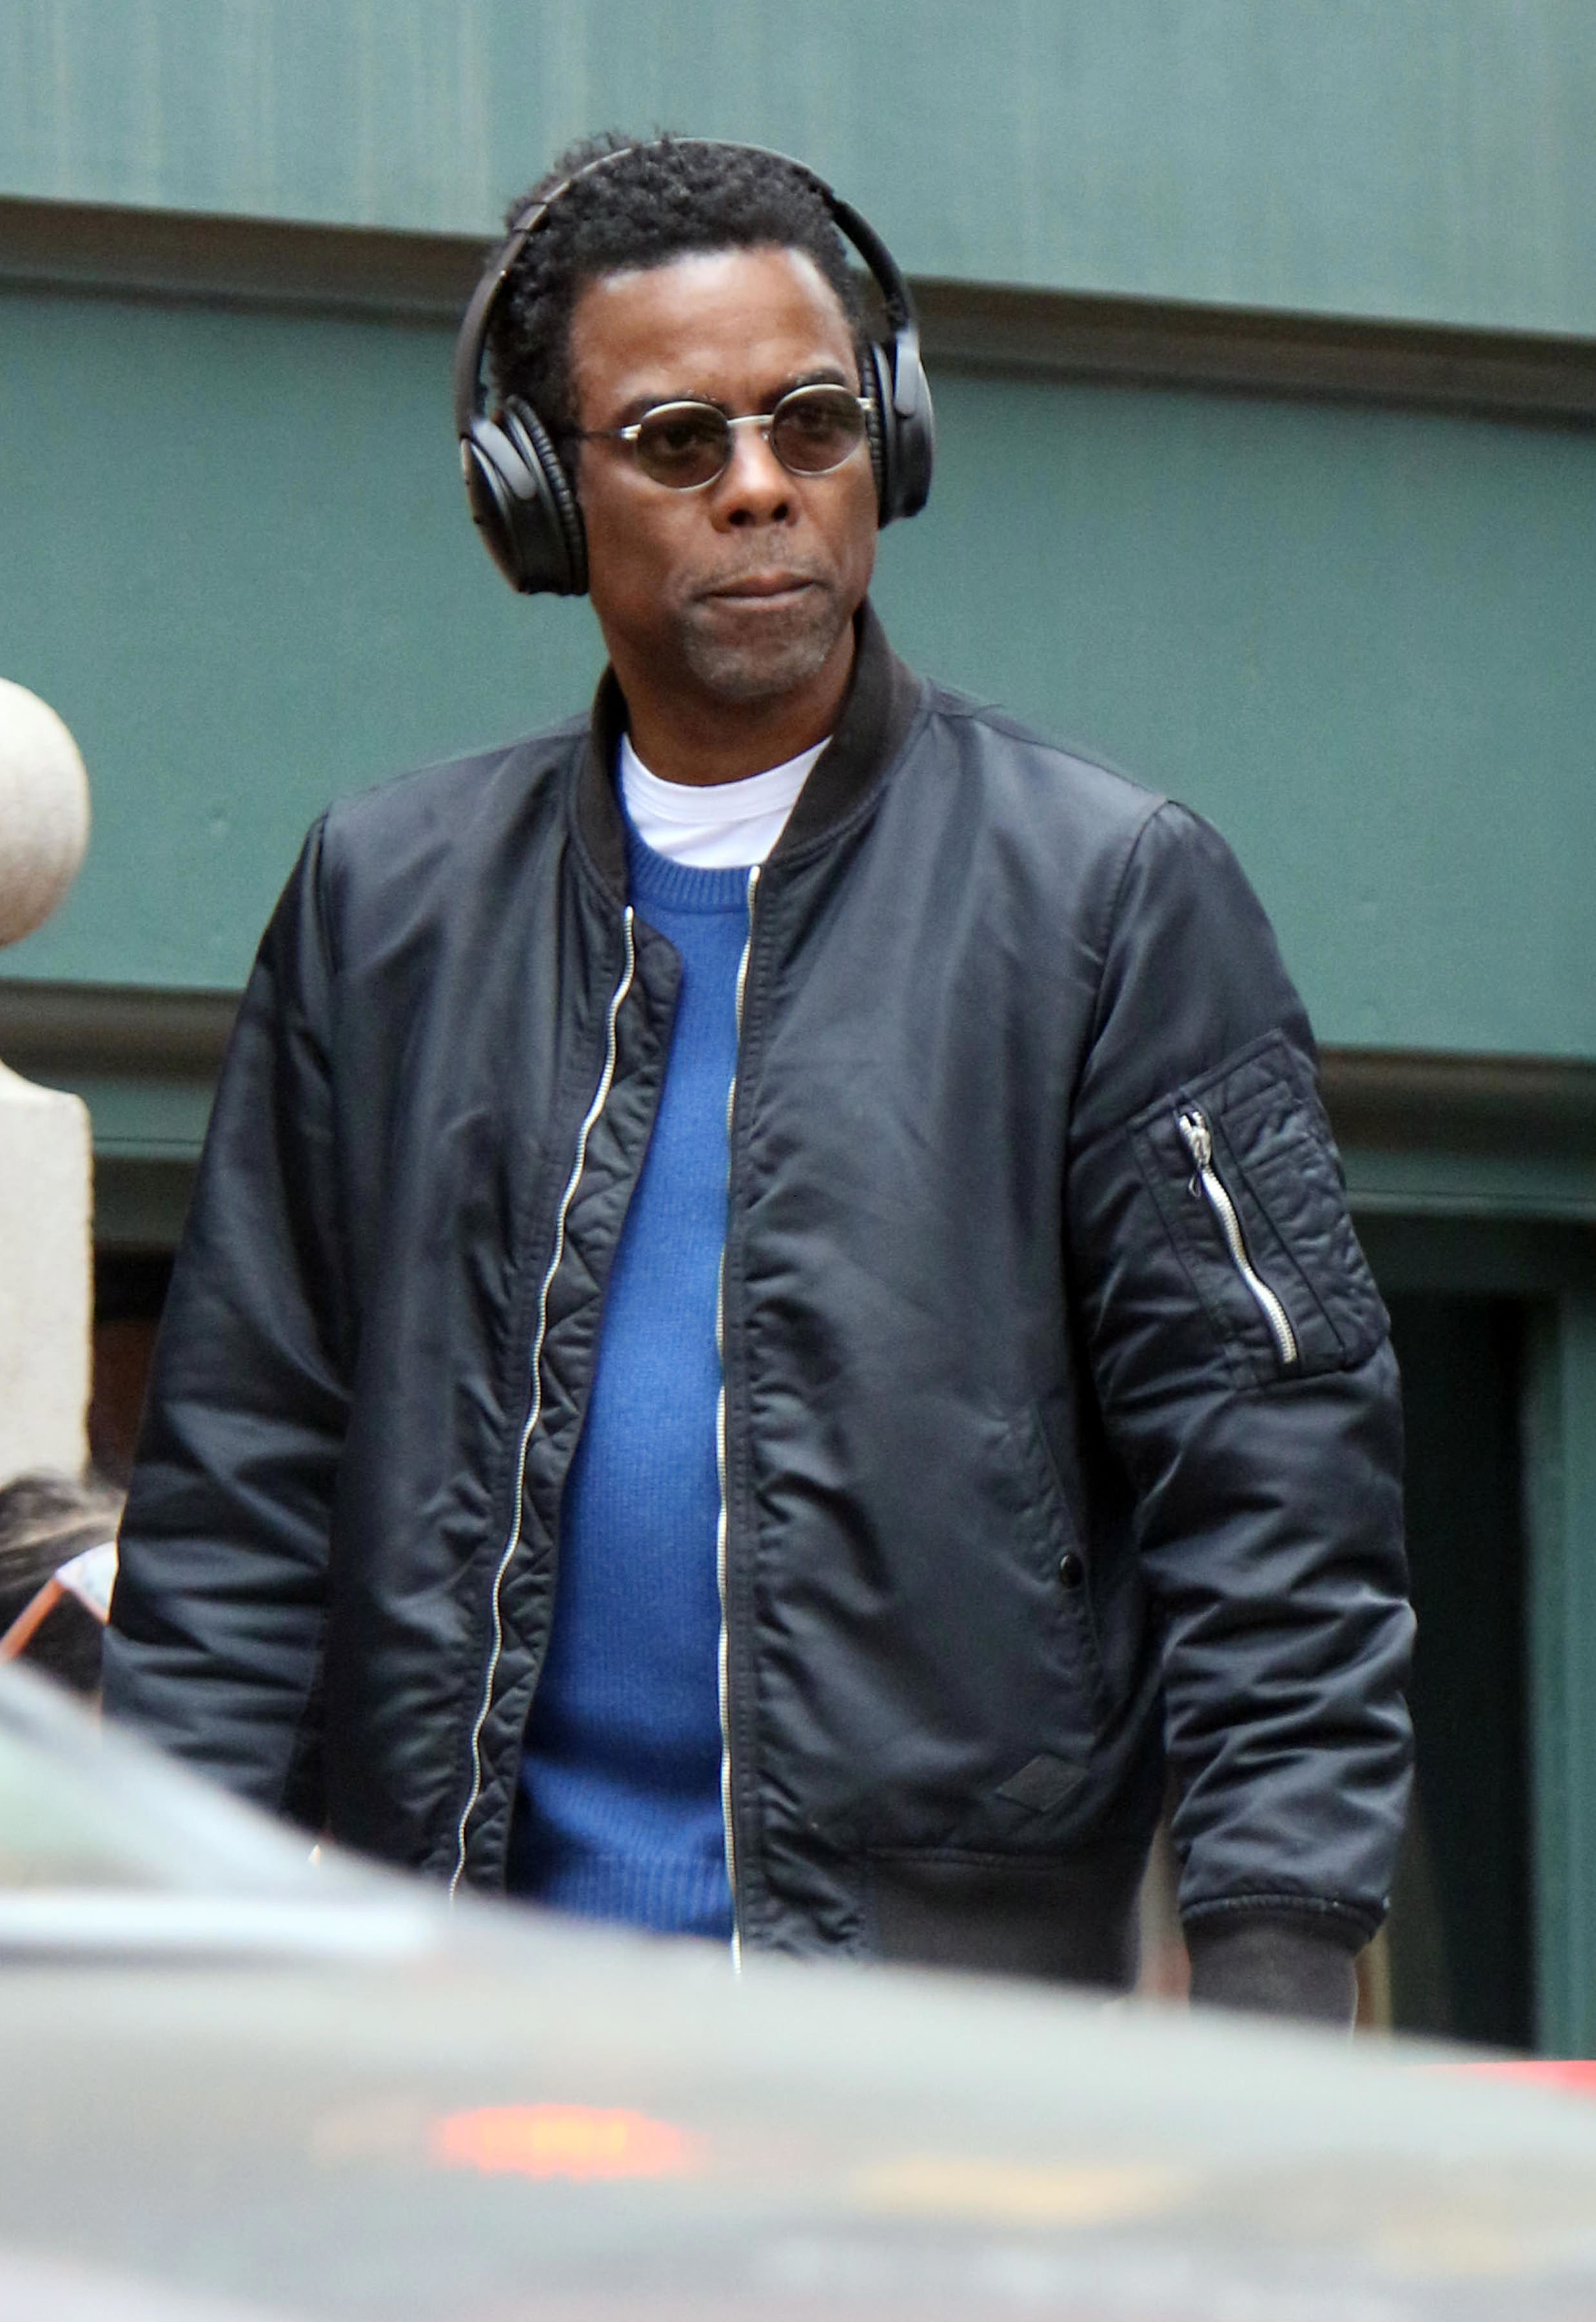 Chris walking down the street with headphones on